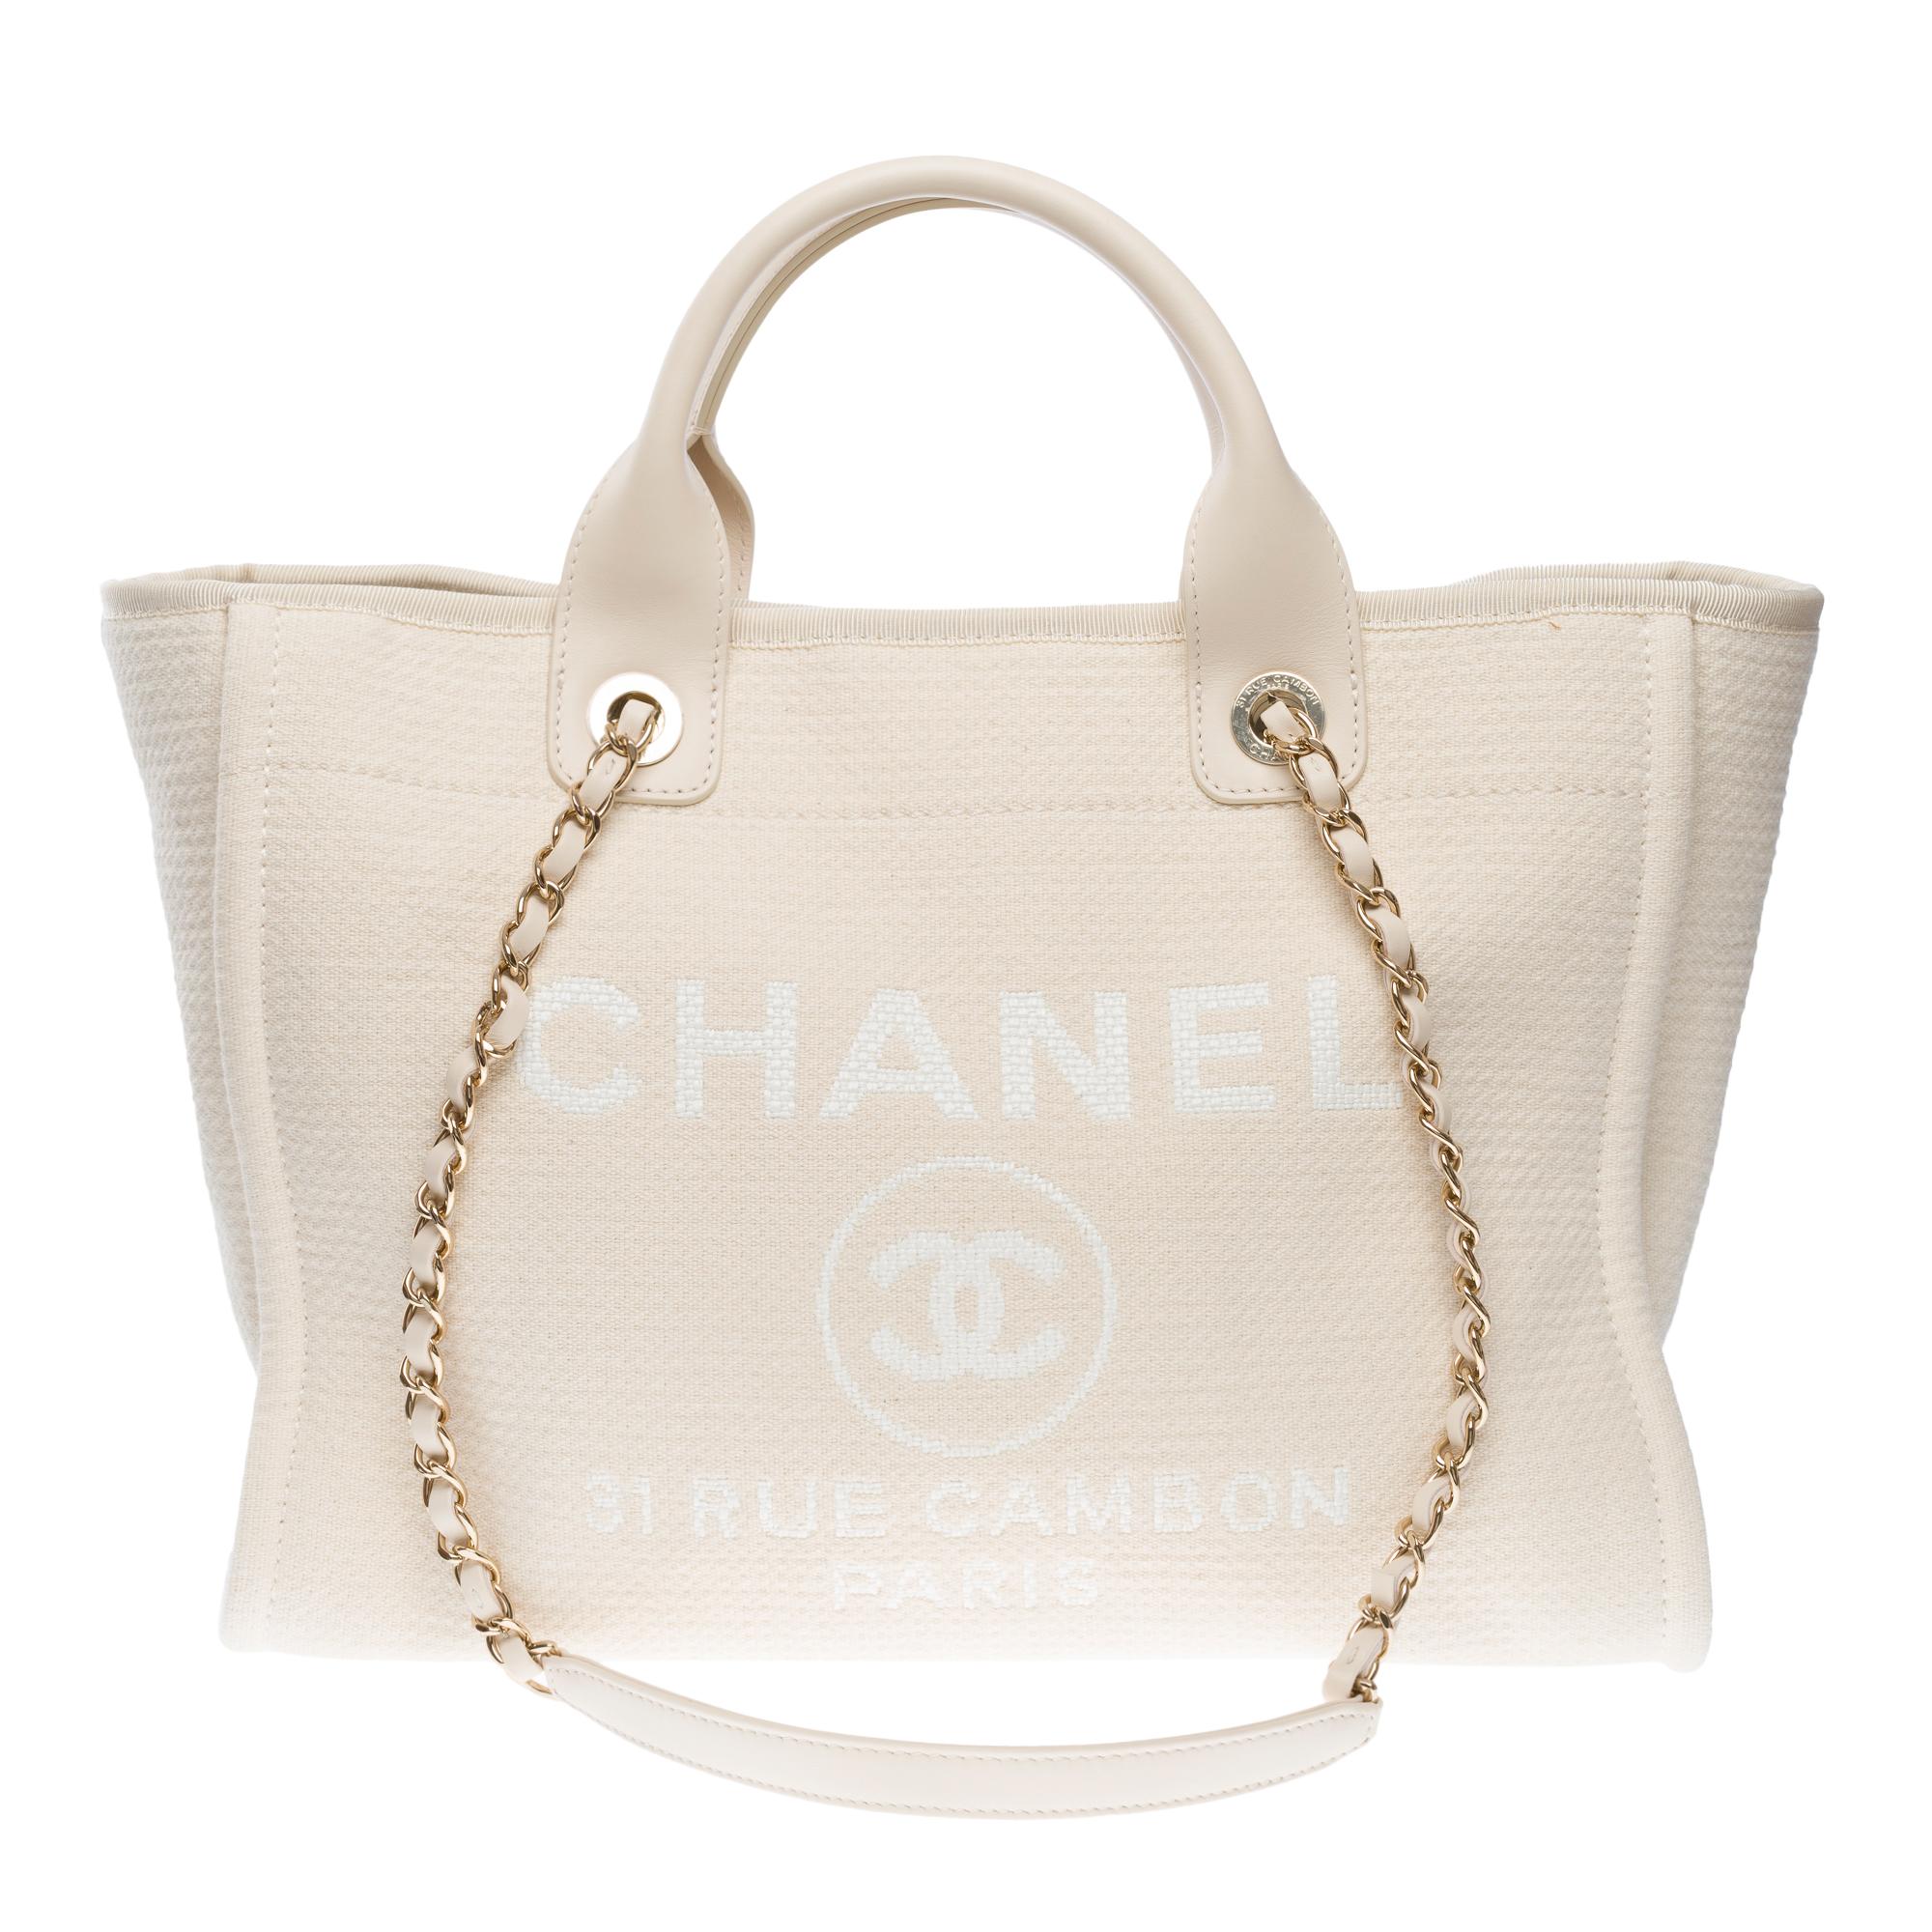 Women's Amazing Chanel Deauville tote bag in off white canvas, SHW For Sale